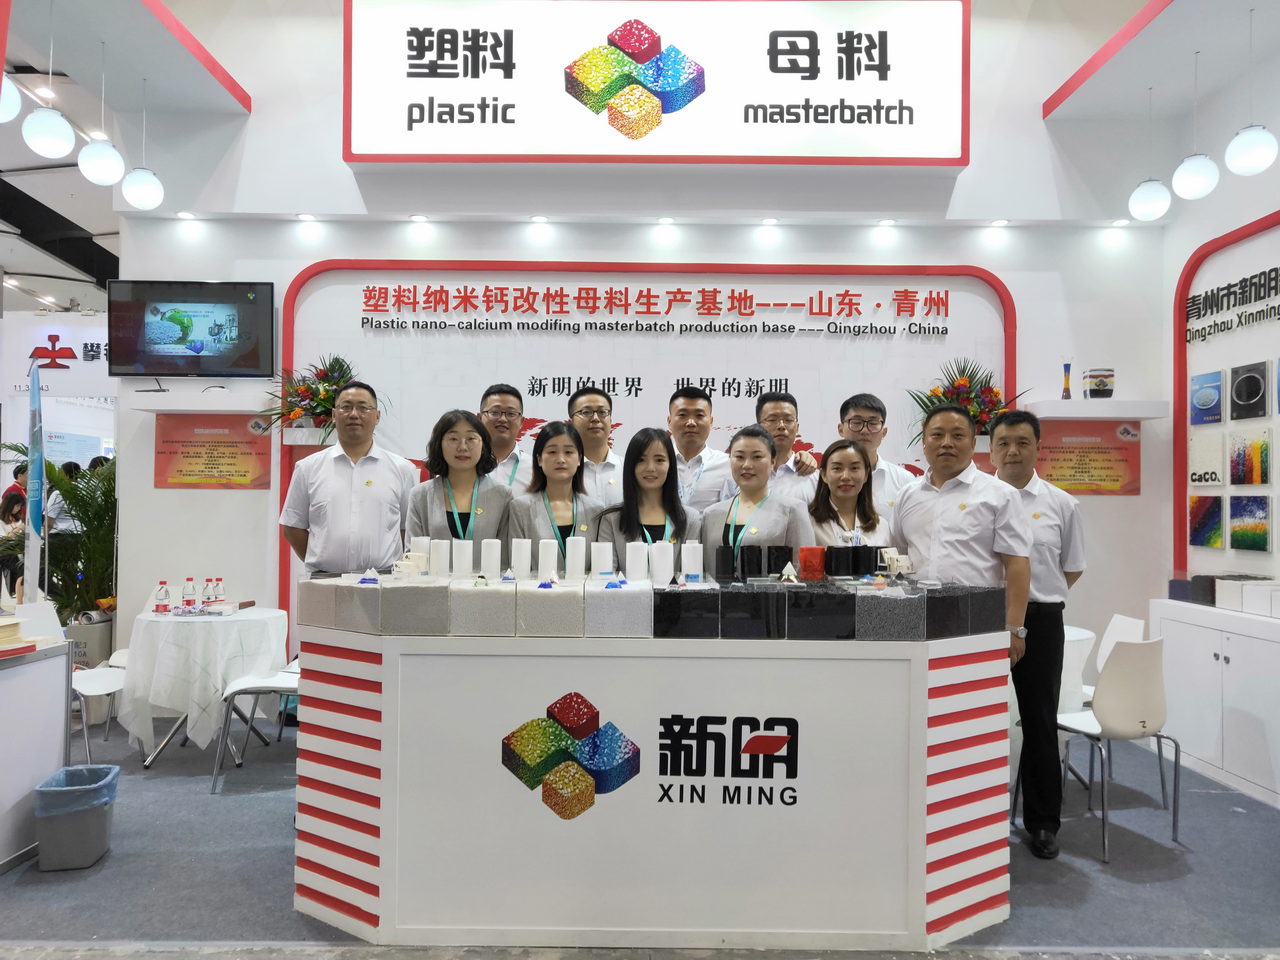 The 33rd International Rubber and Plastics Exhibition in Guangzhou in 2020